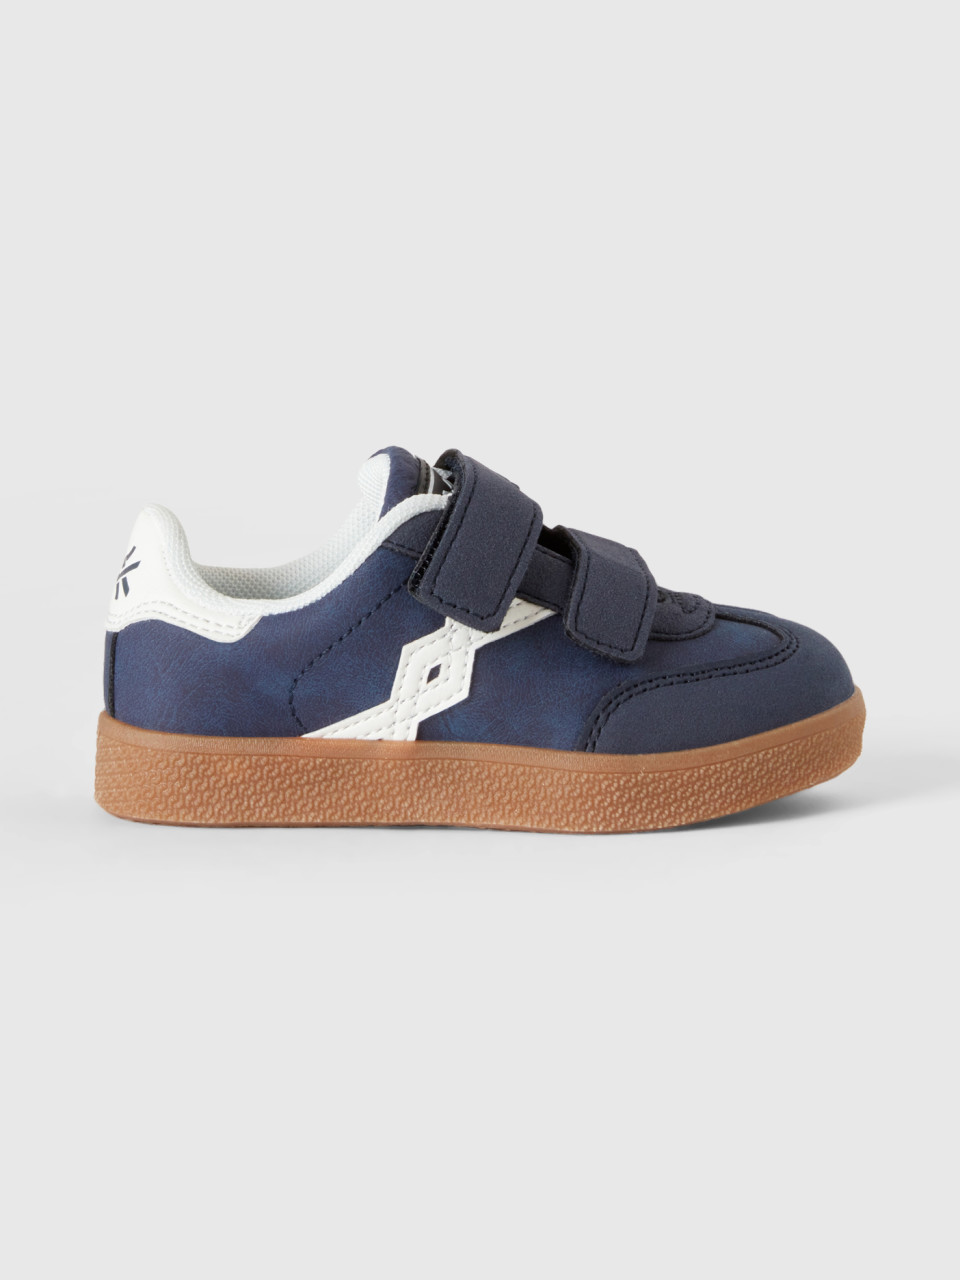 Benetton, Sneakers In Imitation Leather,5C, Blue